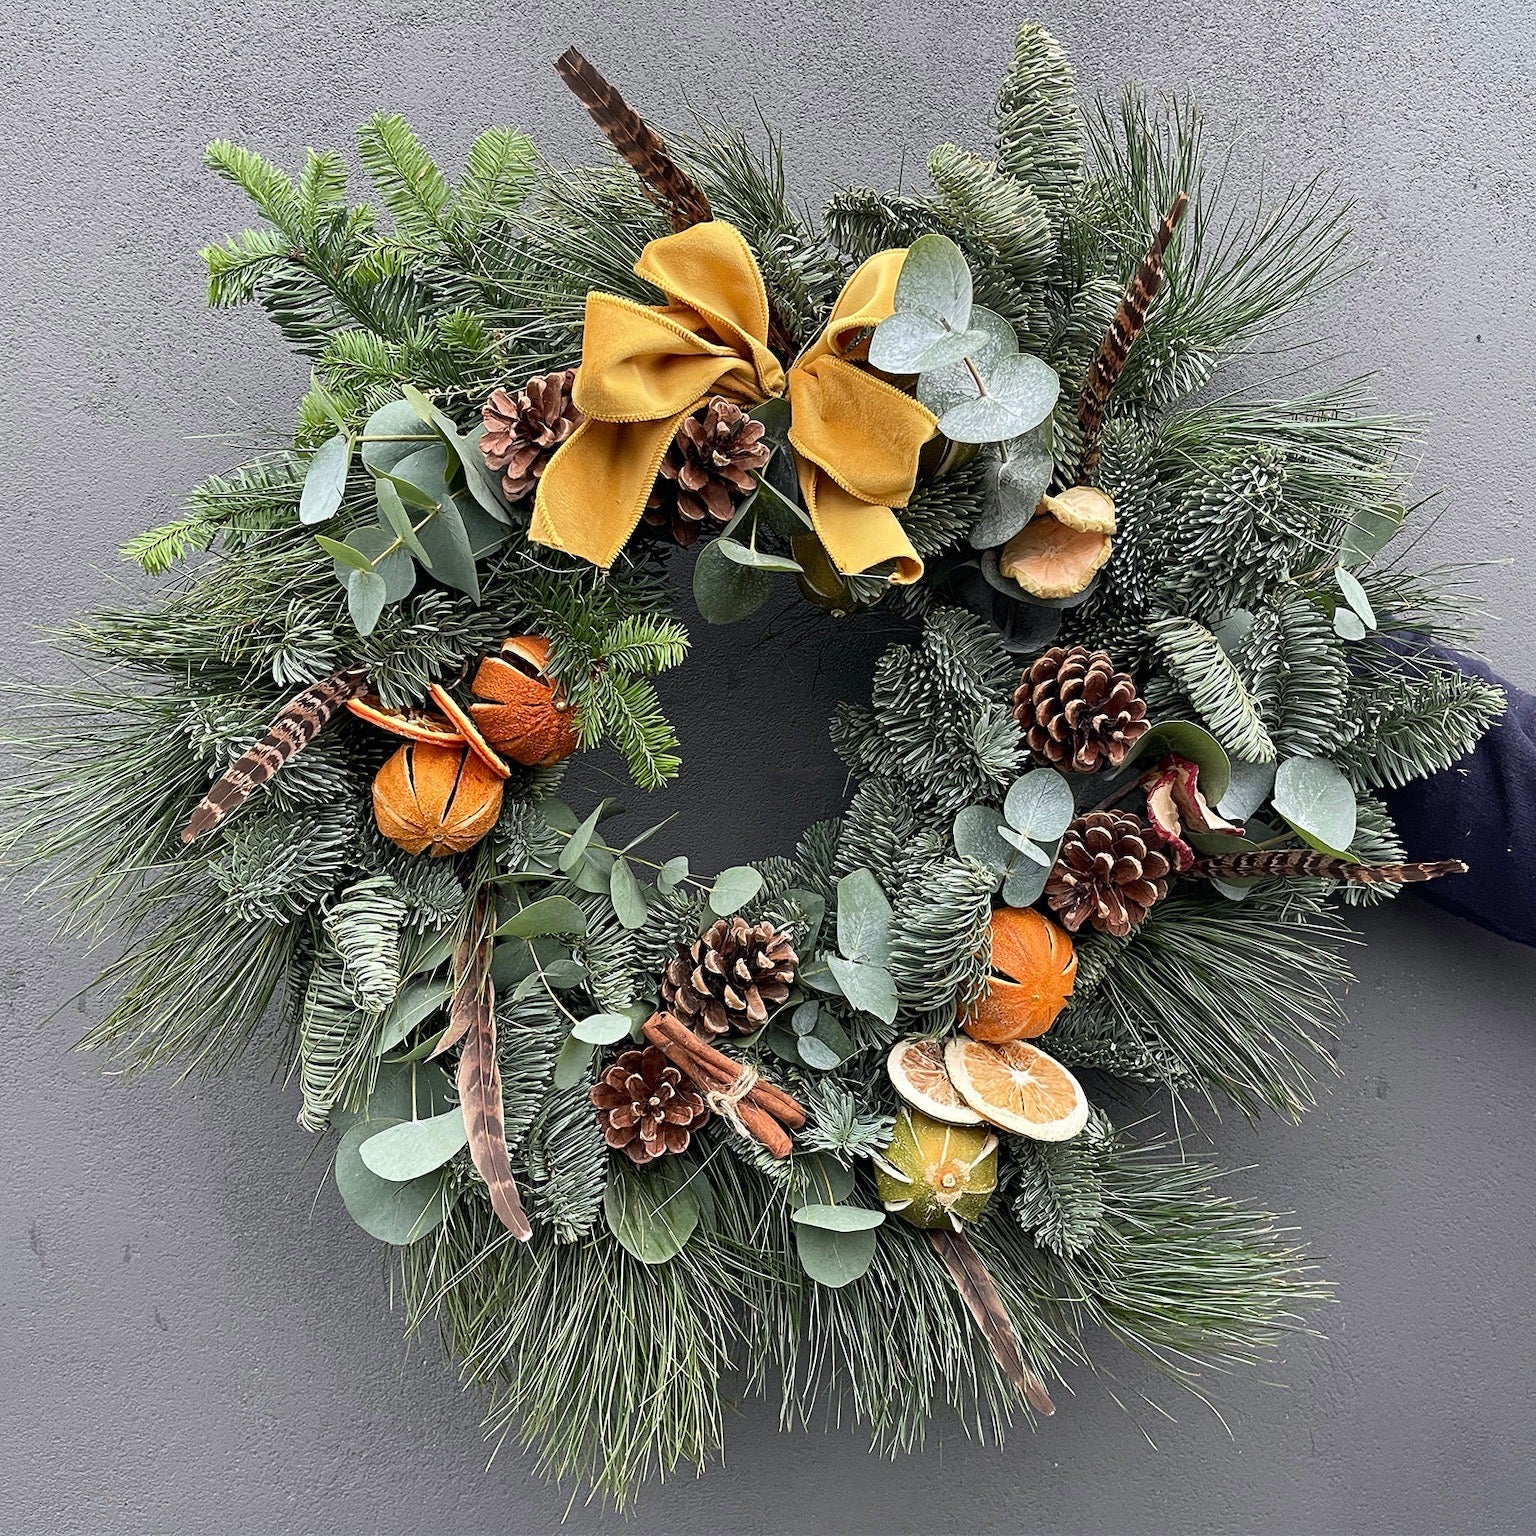 How To Make A Christmas Wreath by Sophie Allport